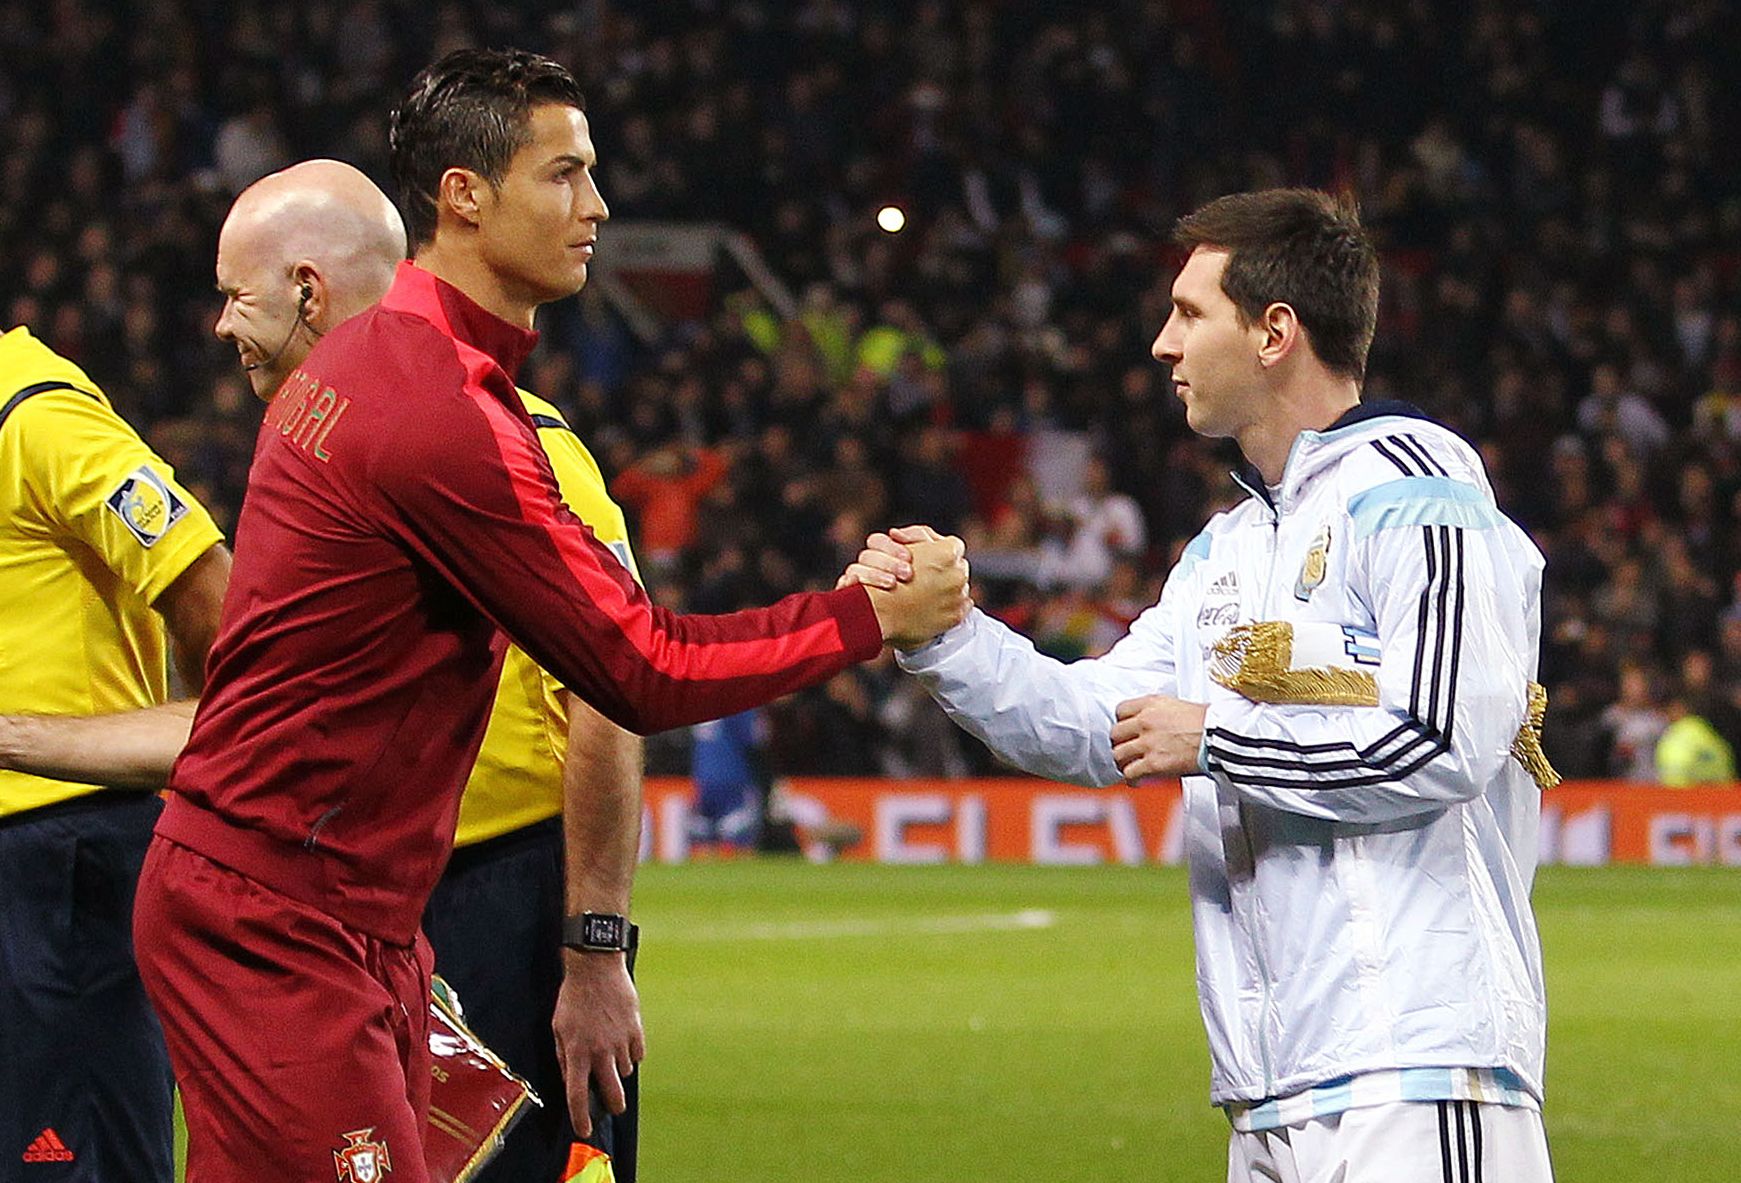 Ronaldo and Messi shake hands before international friendly between Portugal and Argentina